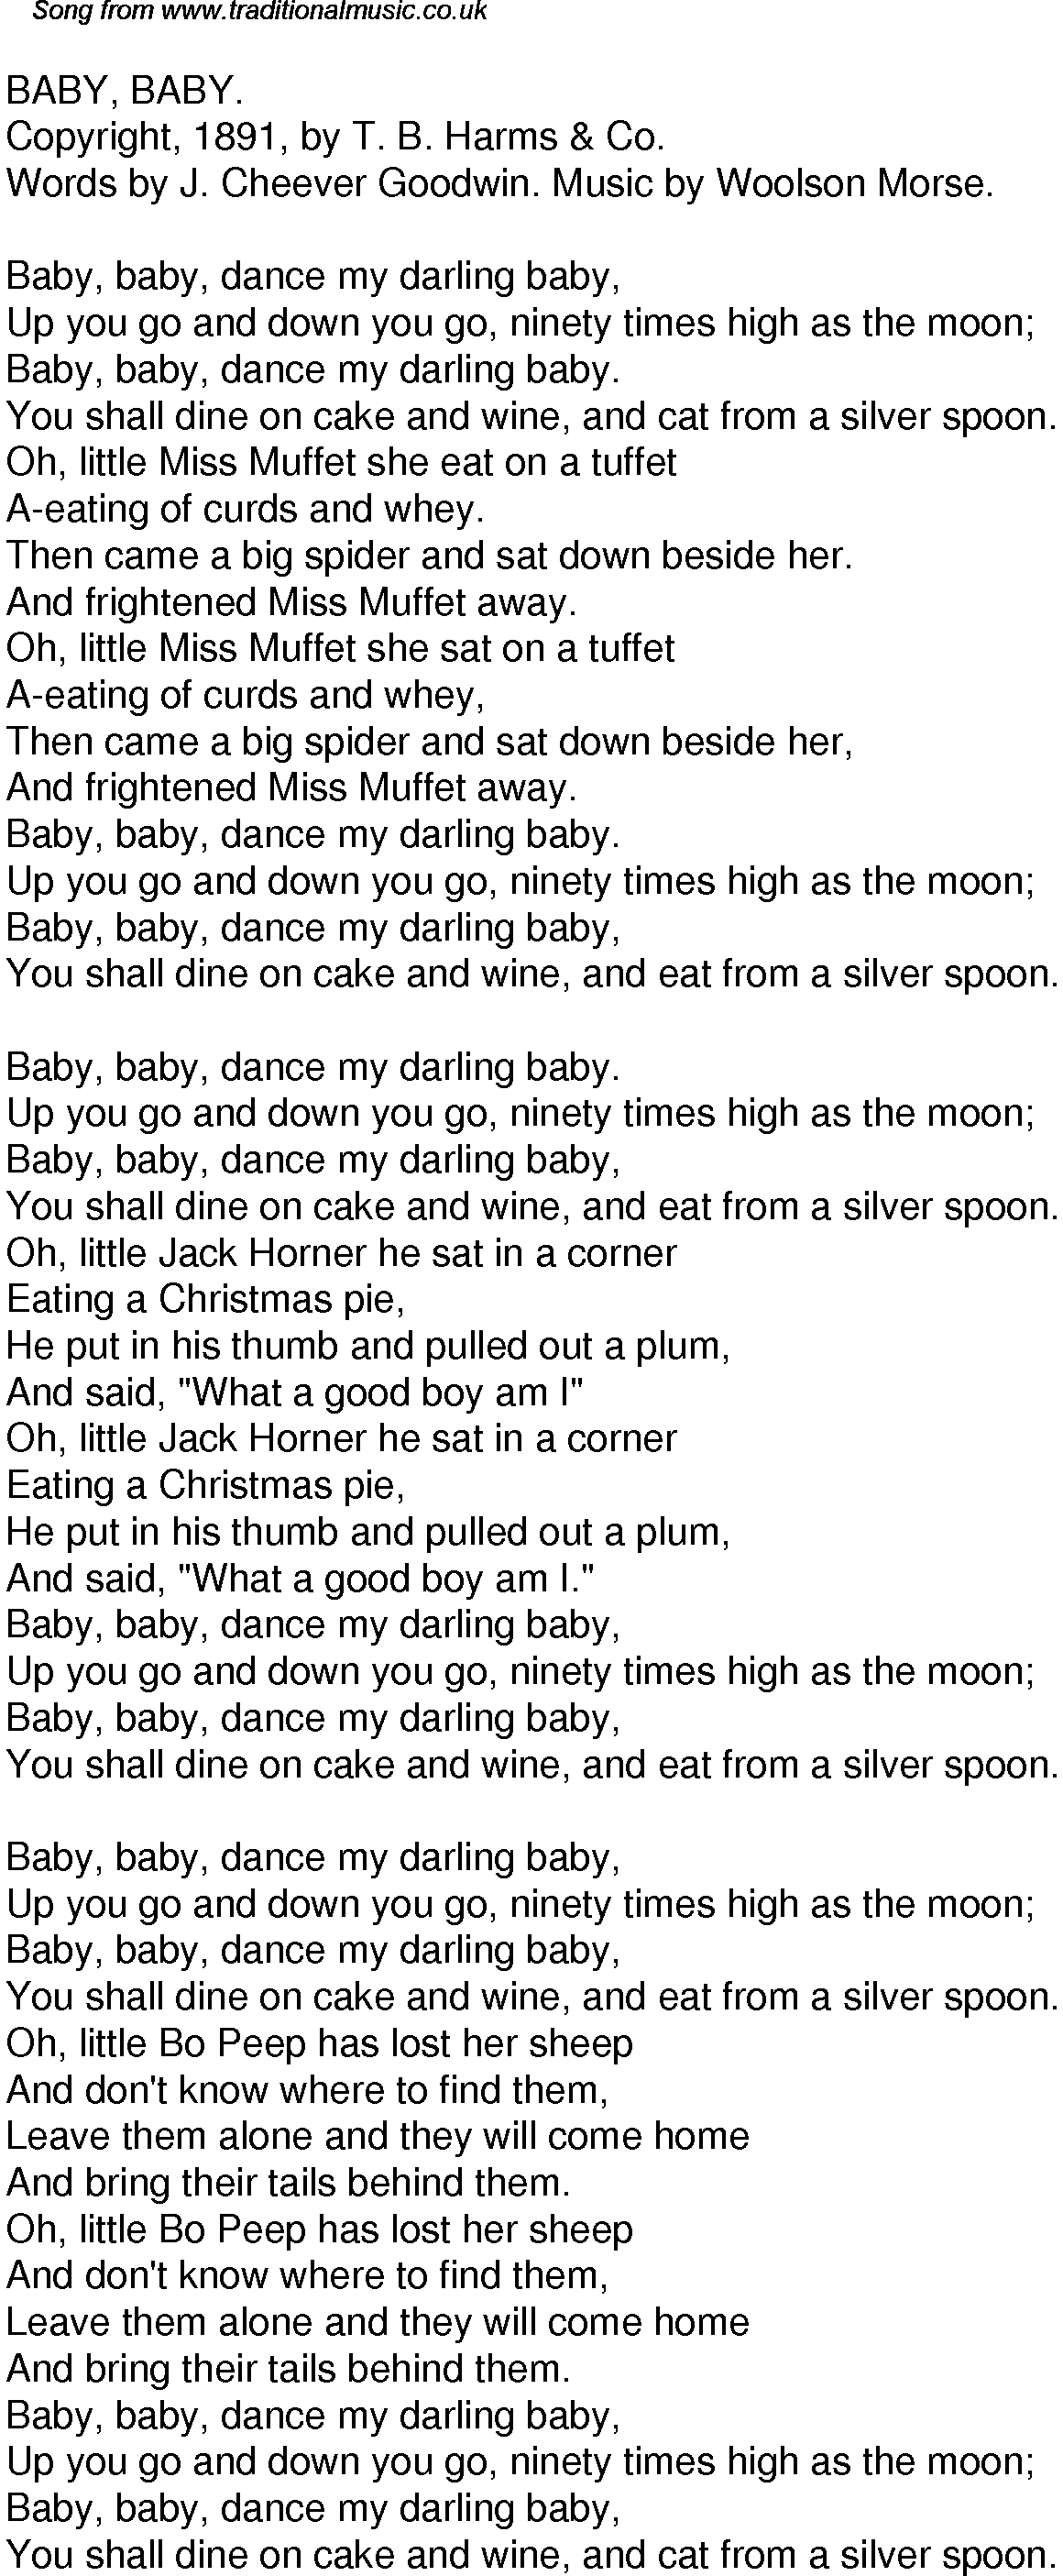 Old Time Song Lyrics for 32 Baby Baby